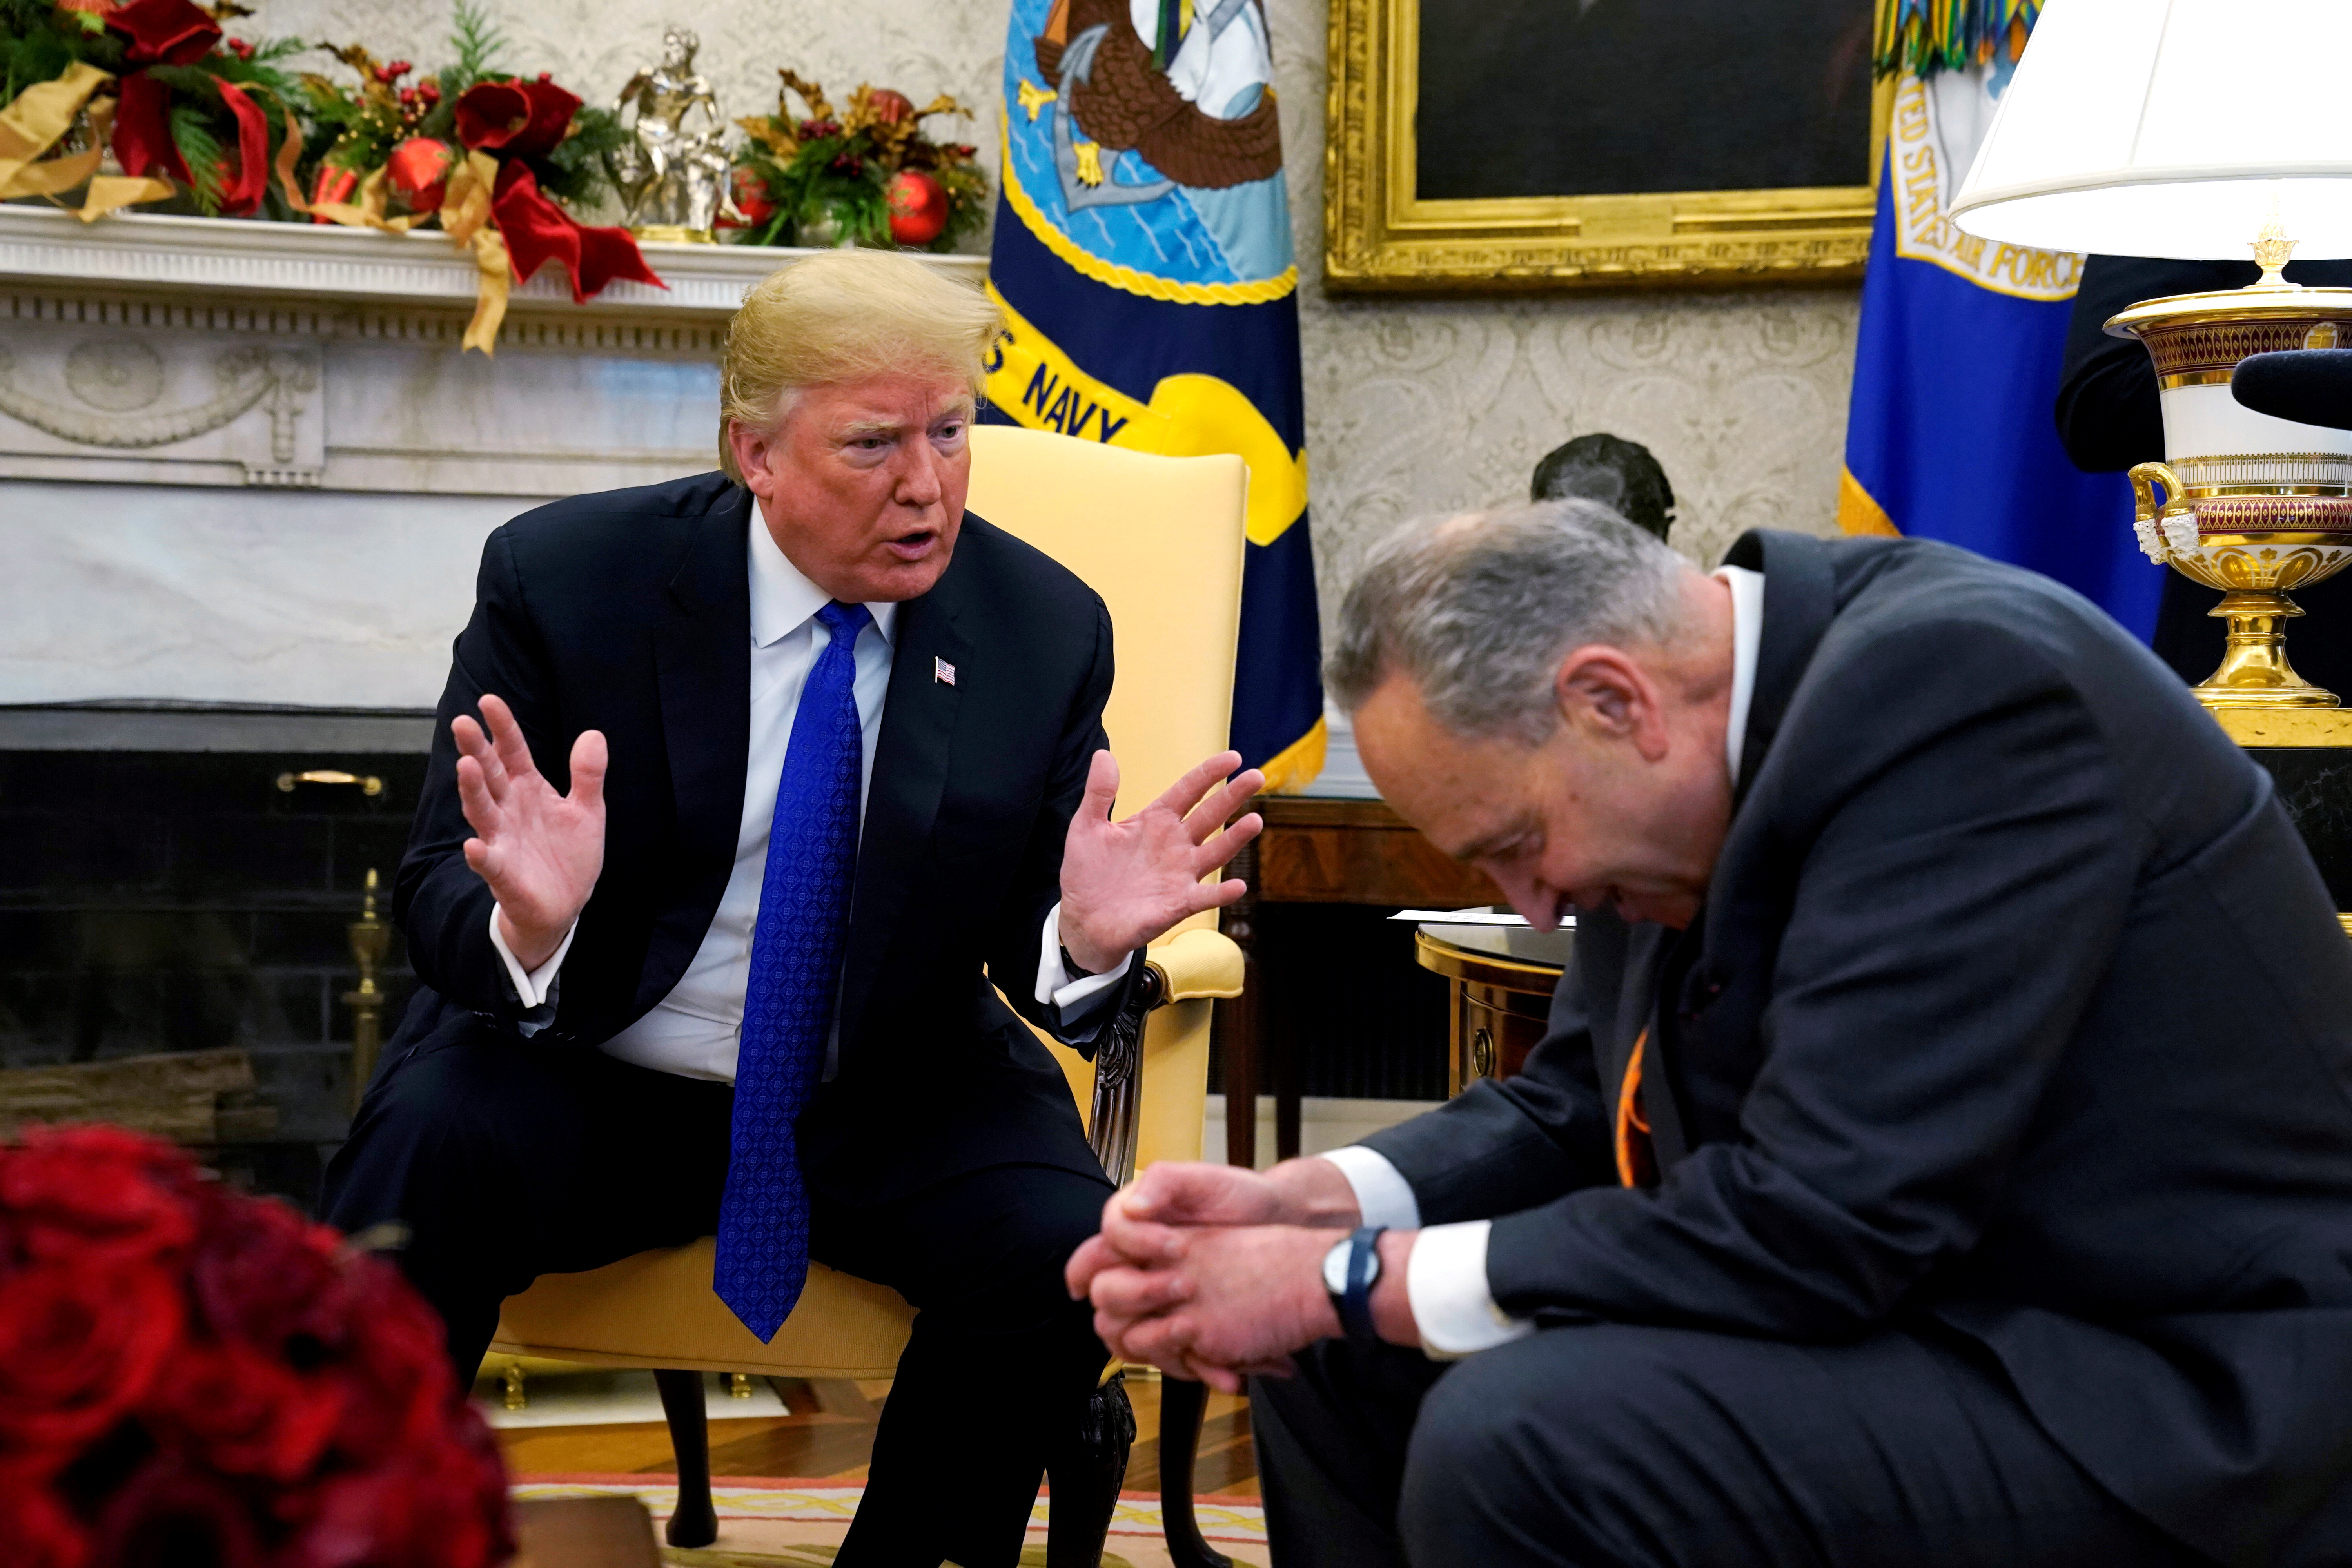 U.S. President Donald Trump speaks with Senate Democratic Leader Chuck Schumer in the Oval Office of the White House in Washington, U.S., December 11, 2018. REUTERS/Kevin Lamarque